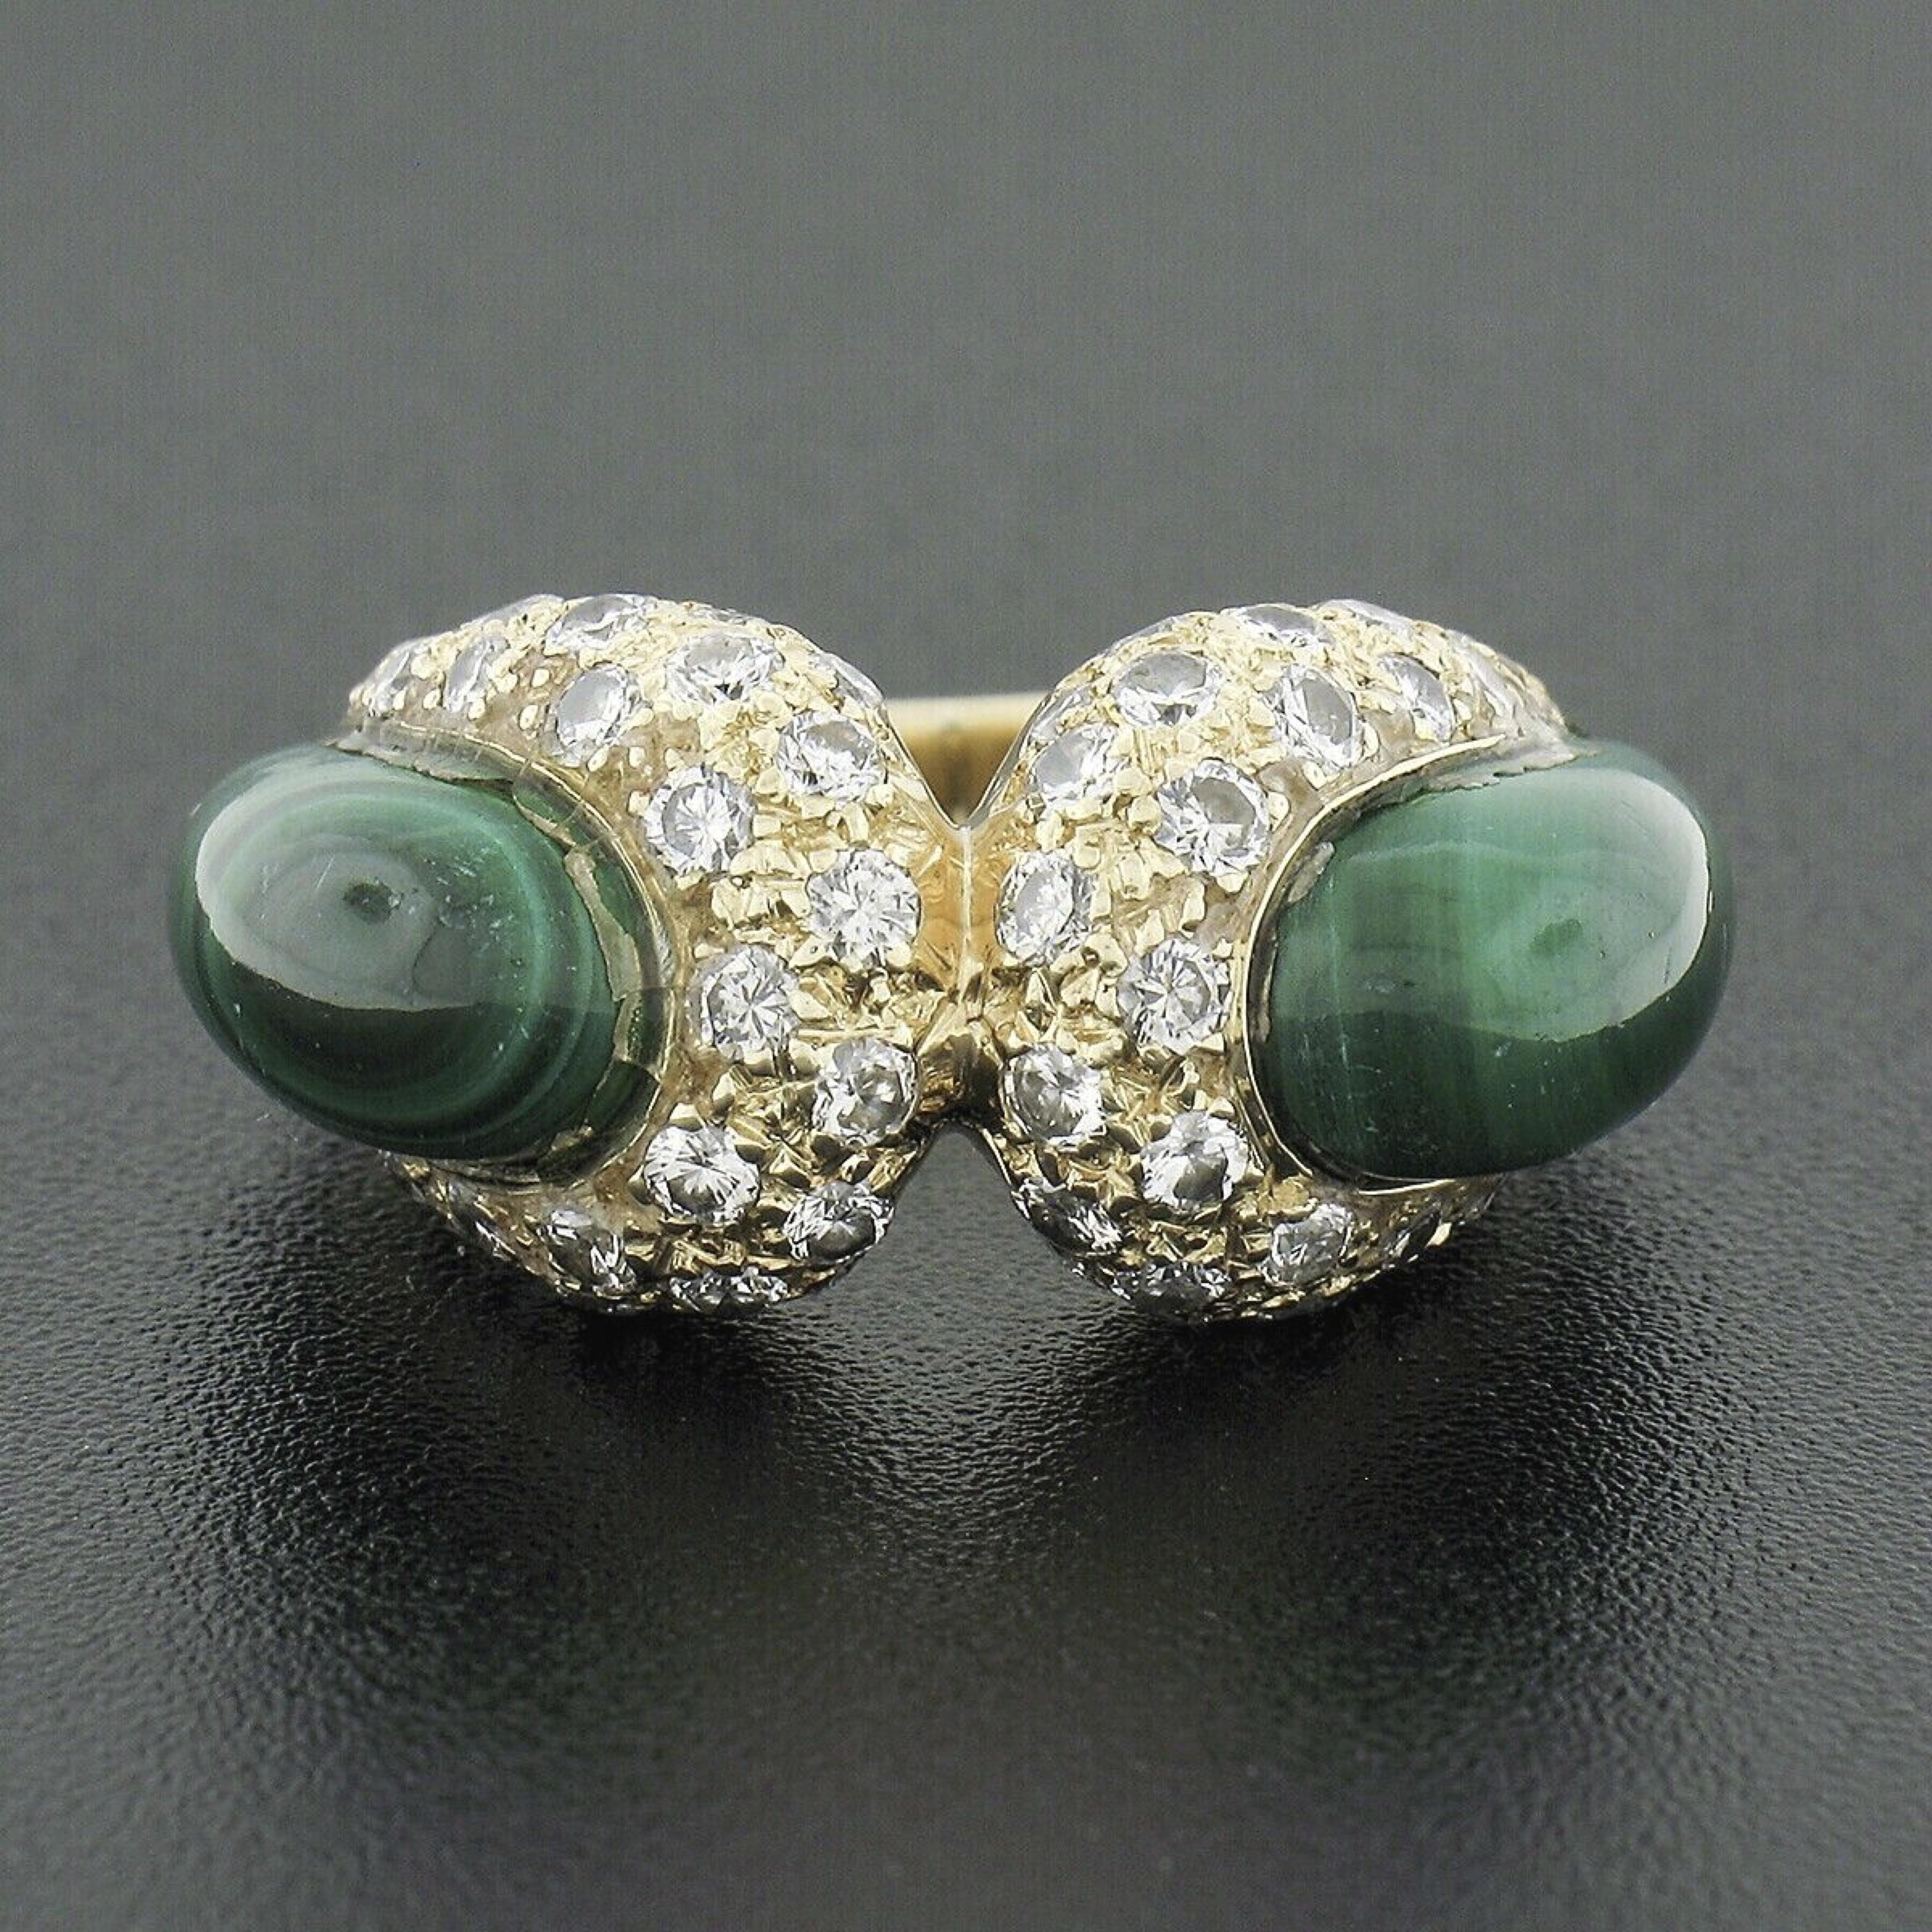 This stunning vintage ring was crafted in solid 18k yellow gold and features a unique design that is elegantly set with fine malachites and diamonds throughout. The custom cabochon cut malachites are set at the sides, showing an absolutely gorgeous